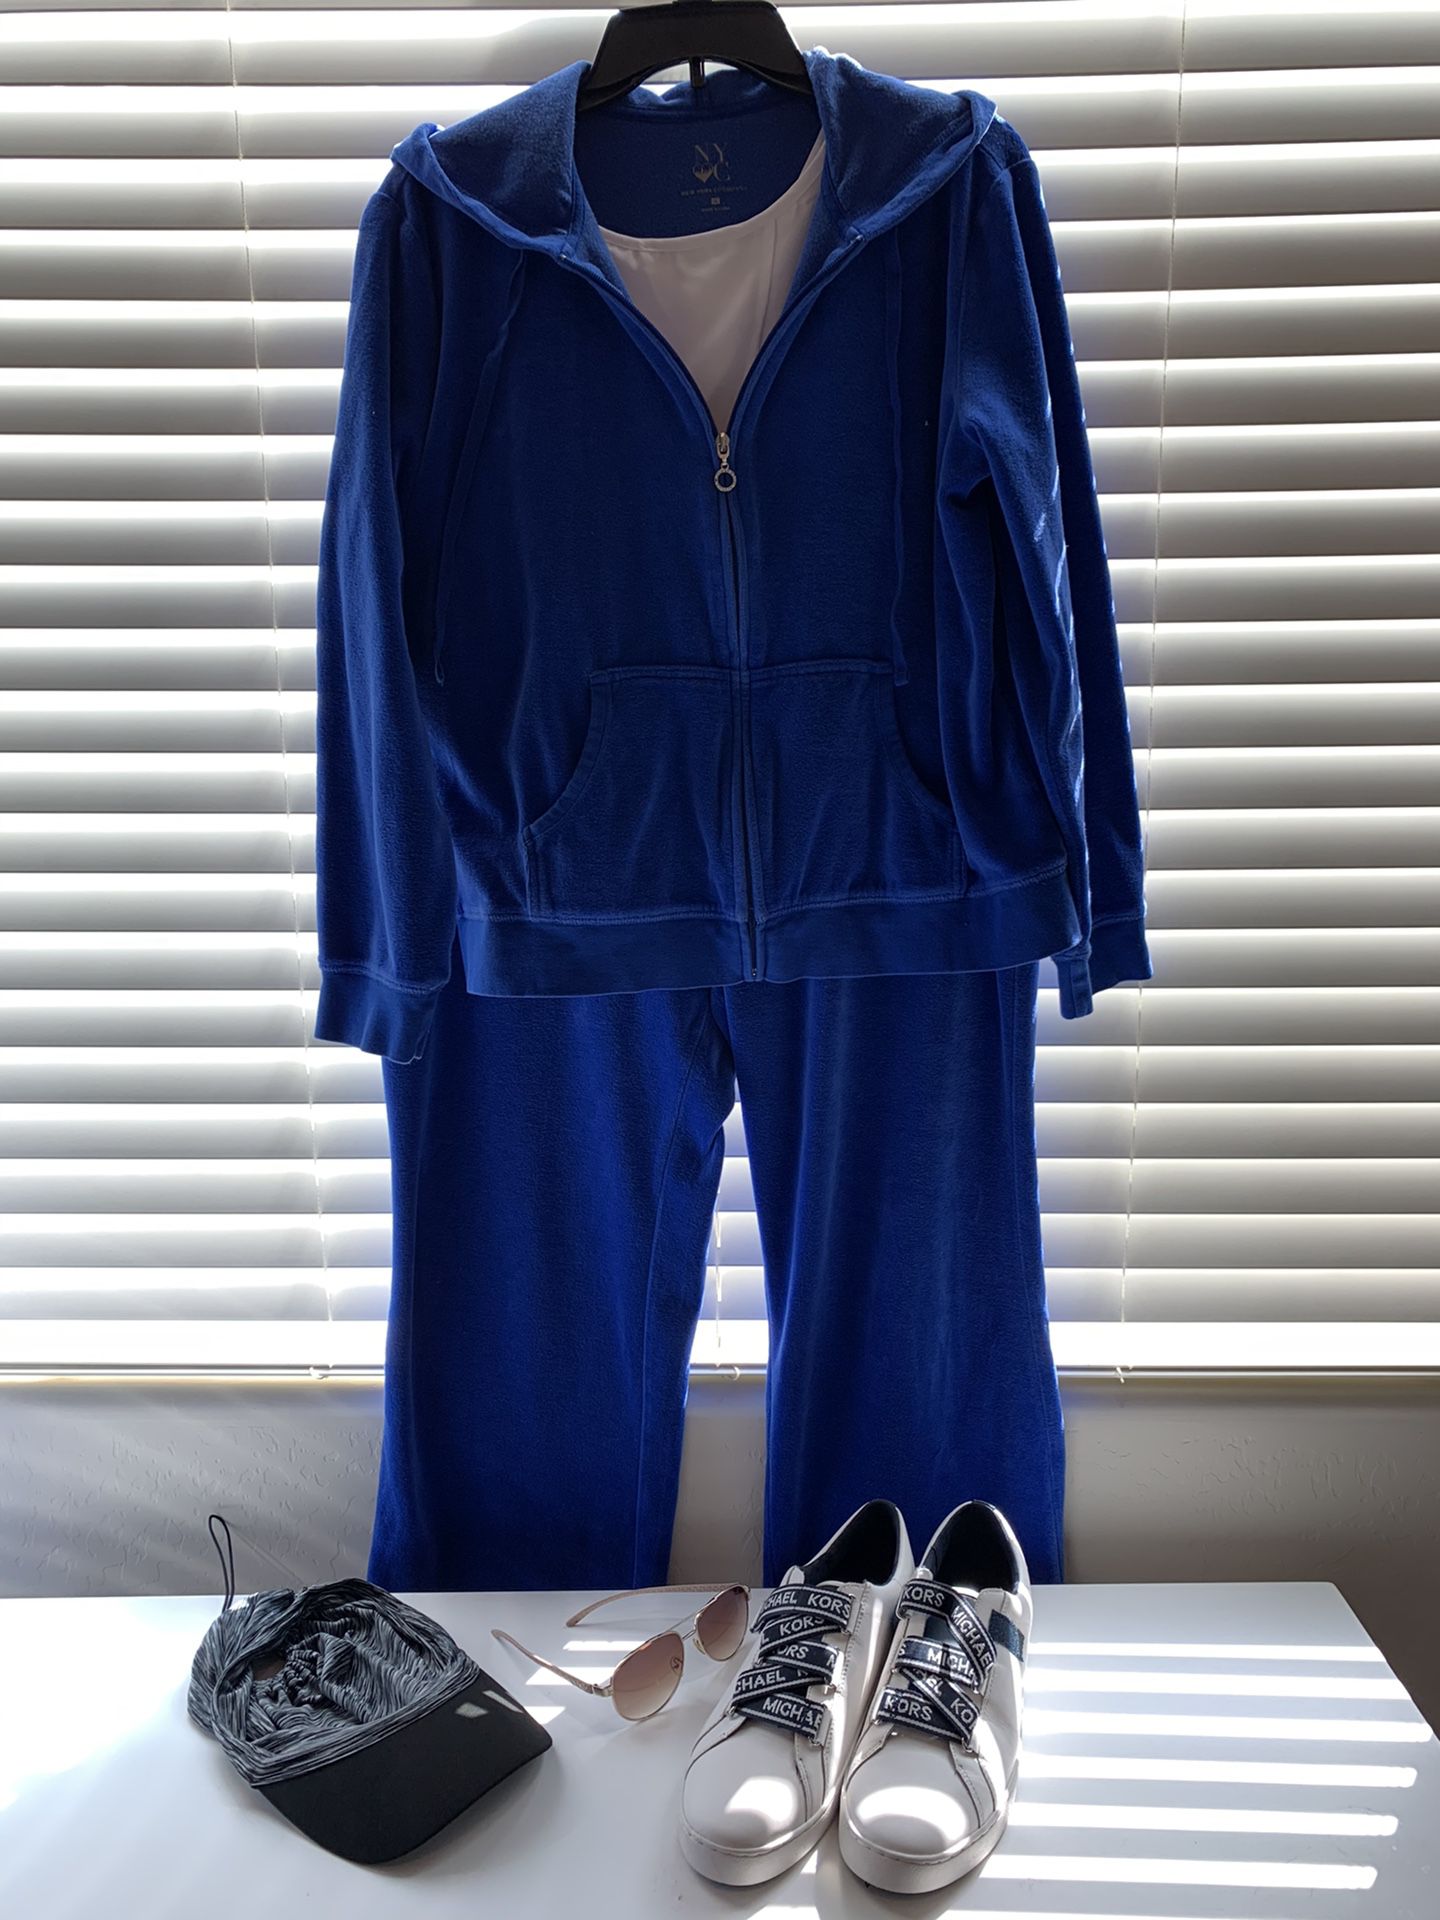 New York and company royal blue jogging suit size extra-large Michael Kors blouse comes free with purchase